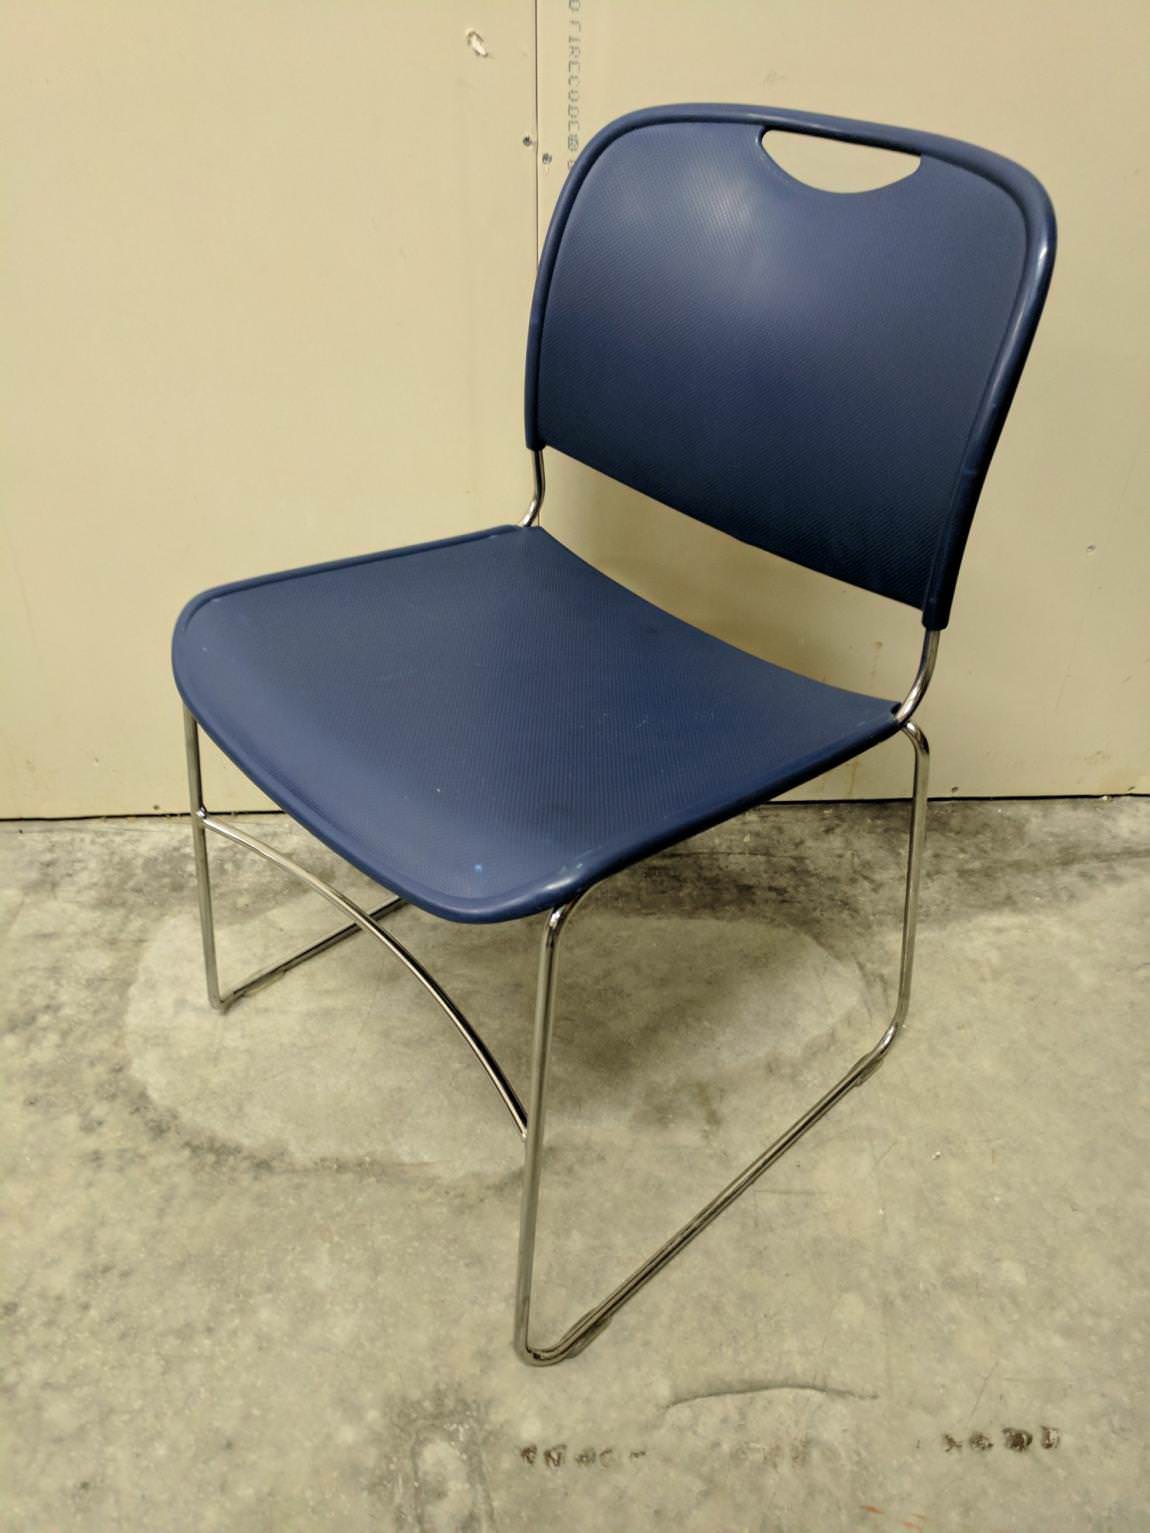 Blue Plastic Stacking Chairs